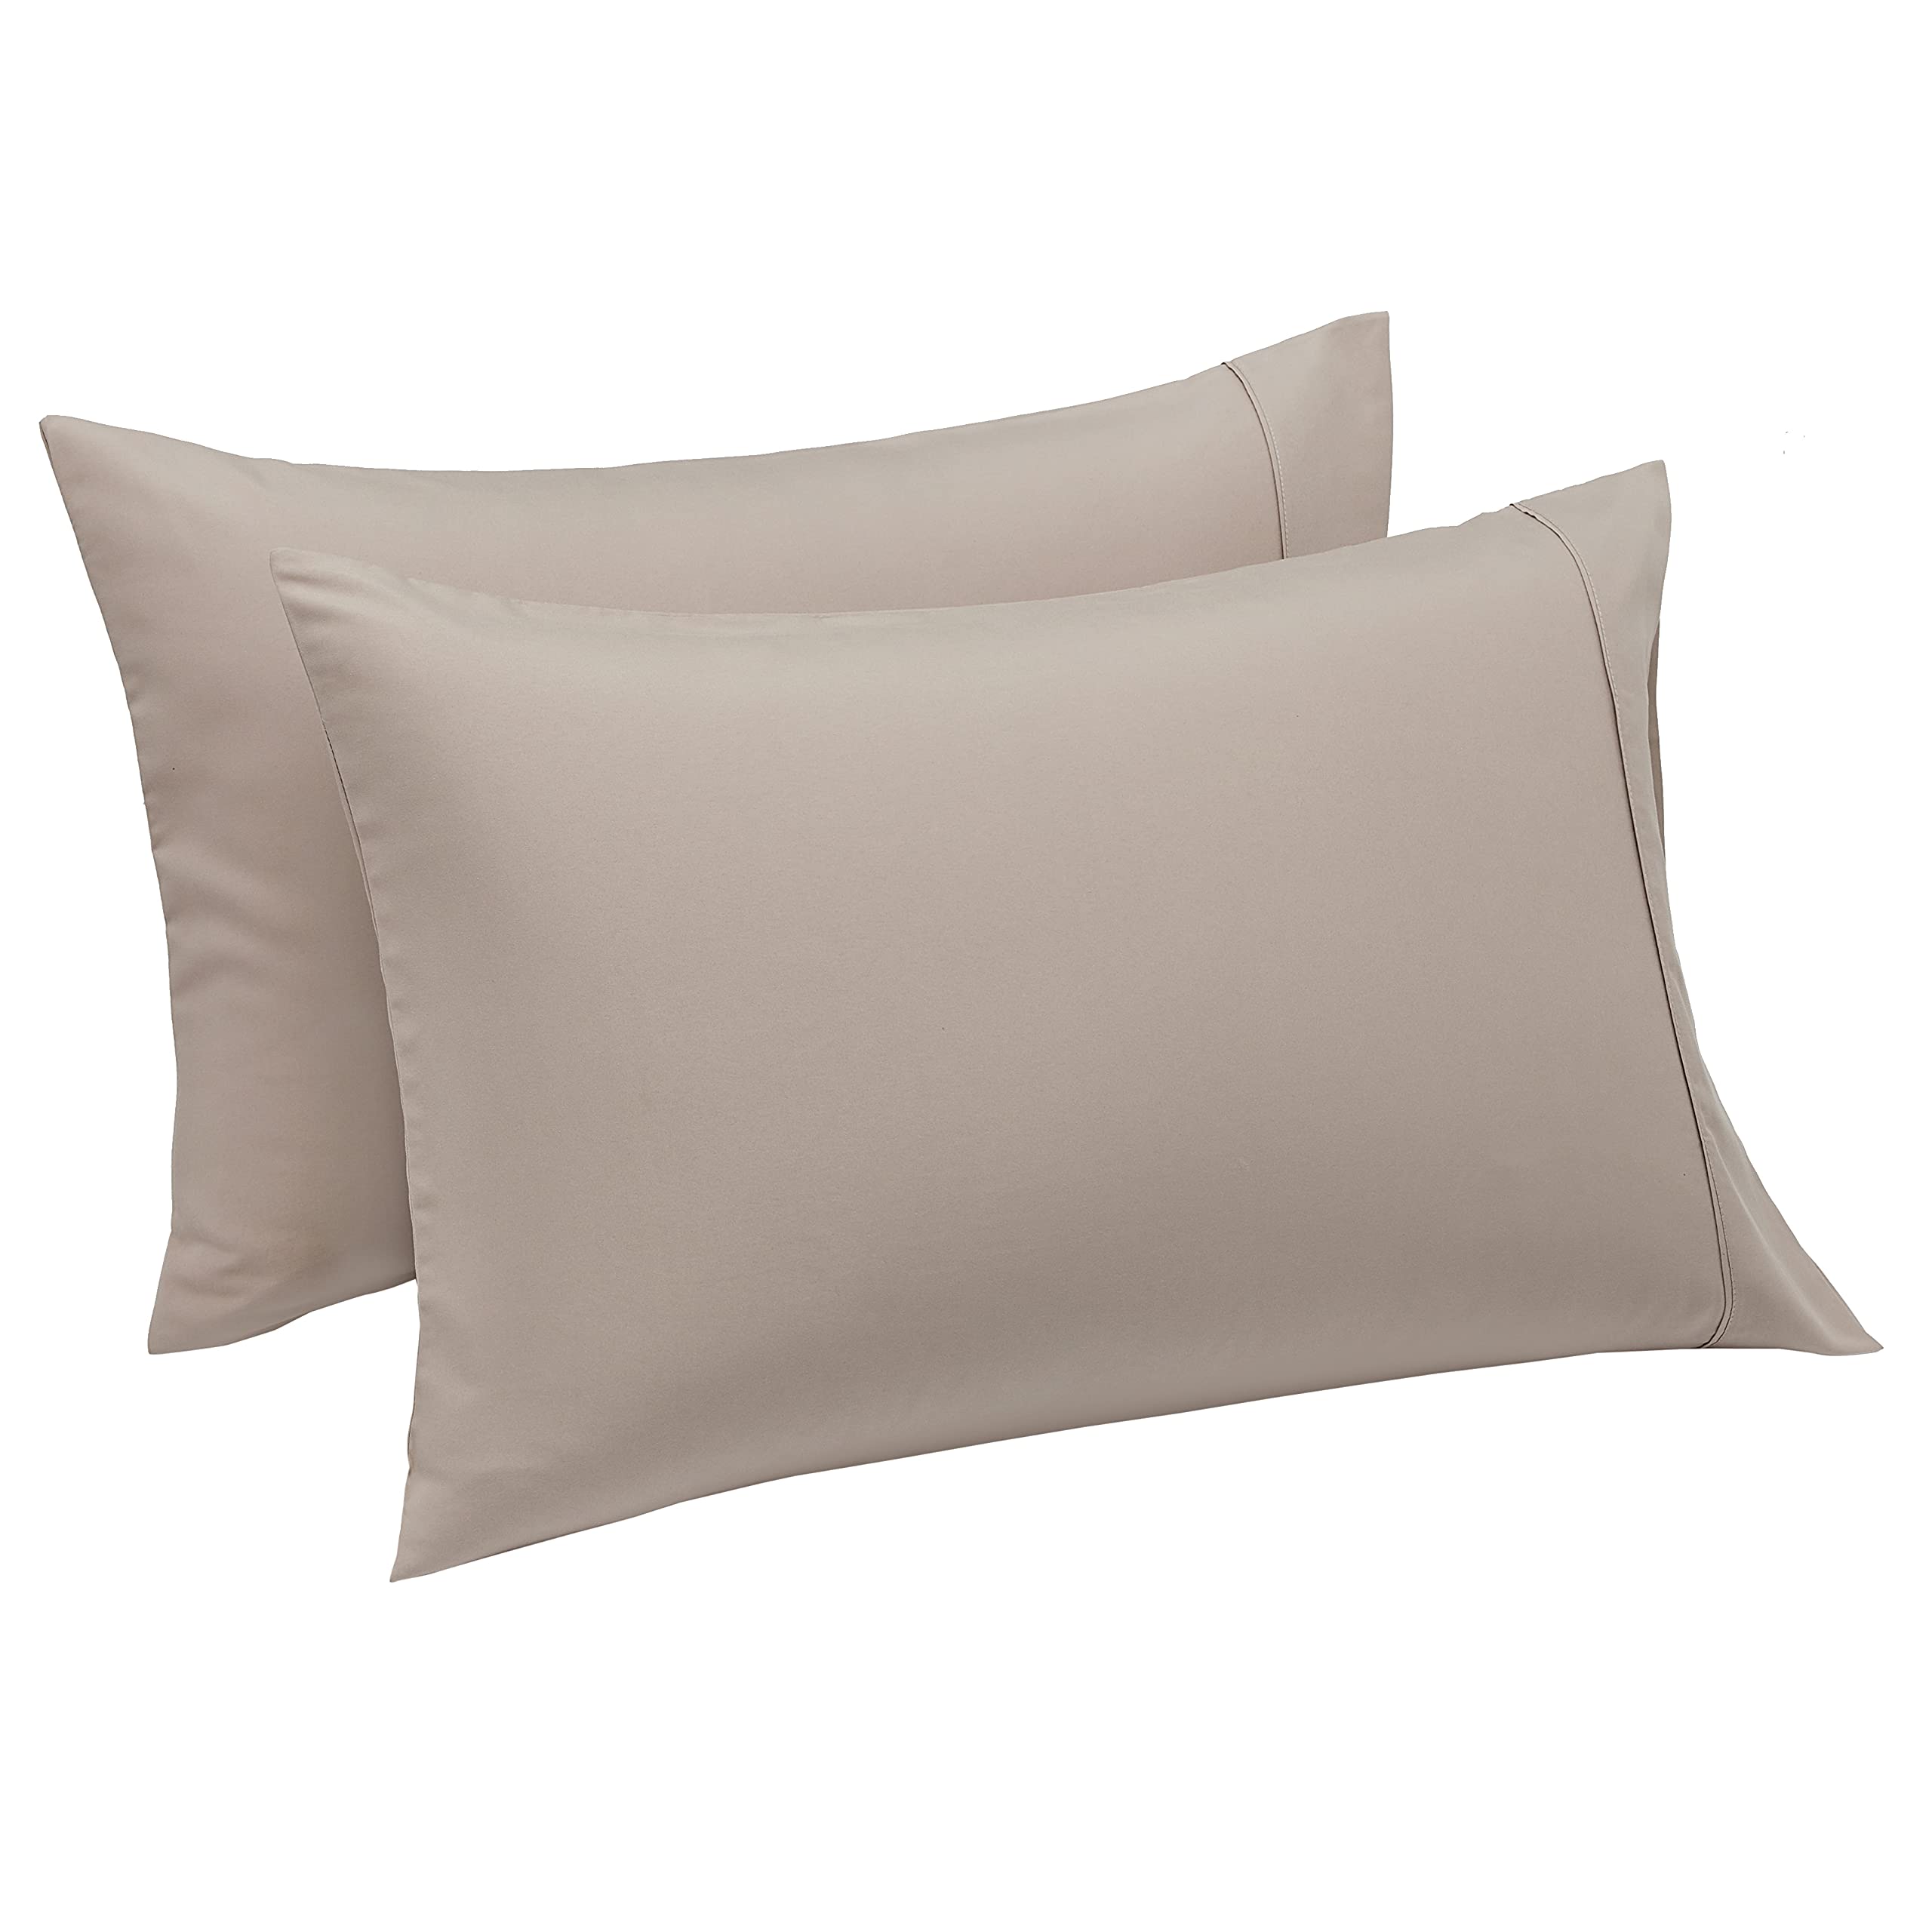 Book Cover Amazon Basics Lightweight Super Soft Easy Care Microfiber Pillowcases, 2 Pack, King, Taupe, 40